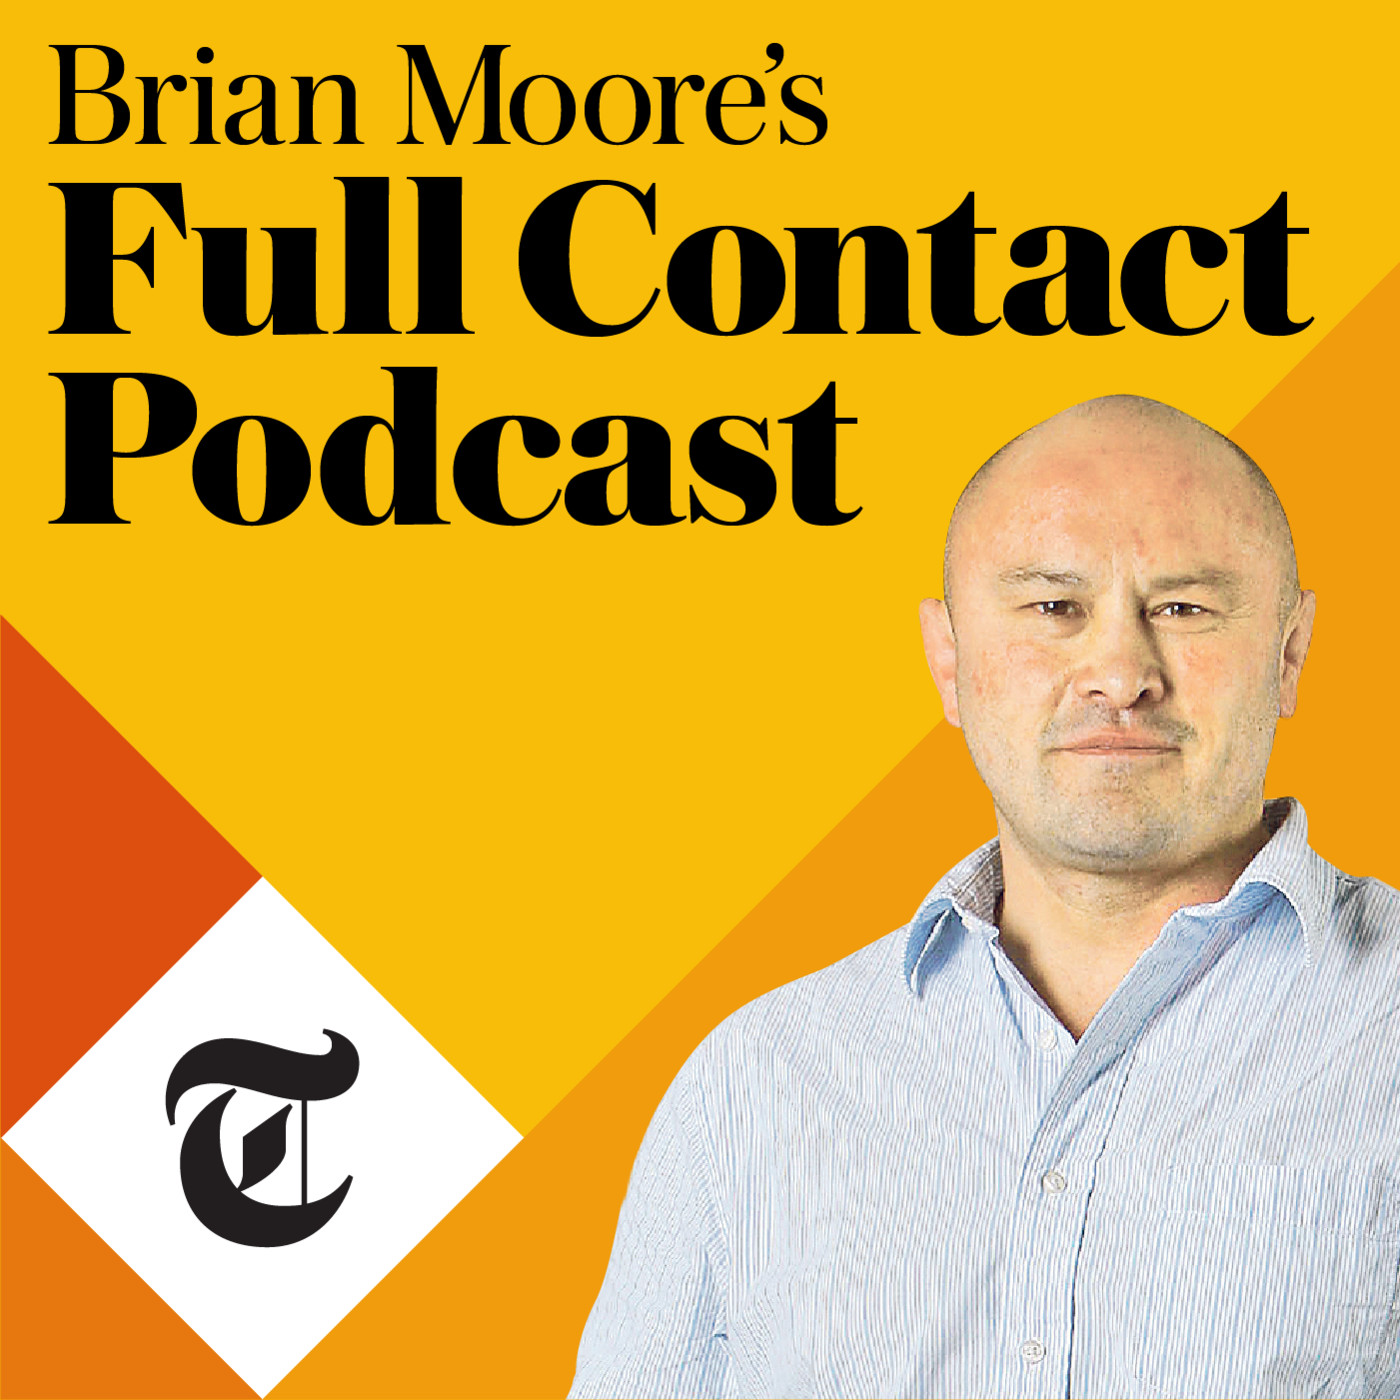 Brian Moore: I didn't believe that the All Blacks would get back into the match and Ireland didn't let them